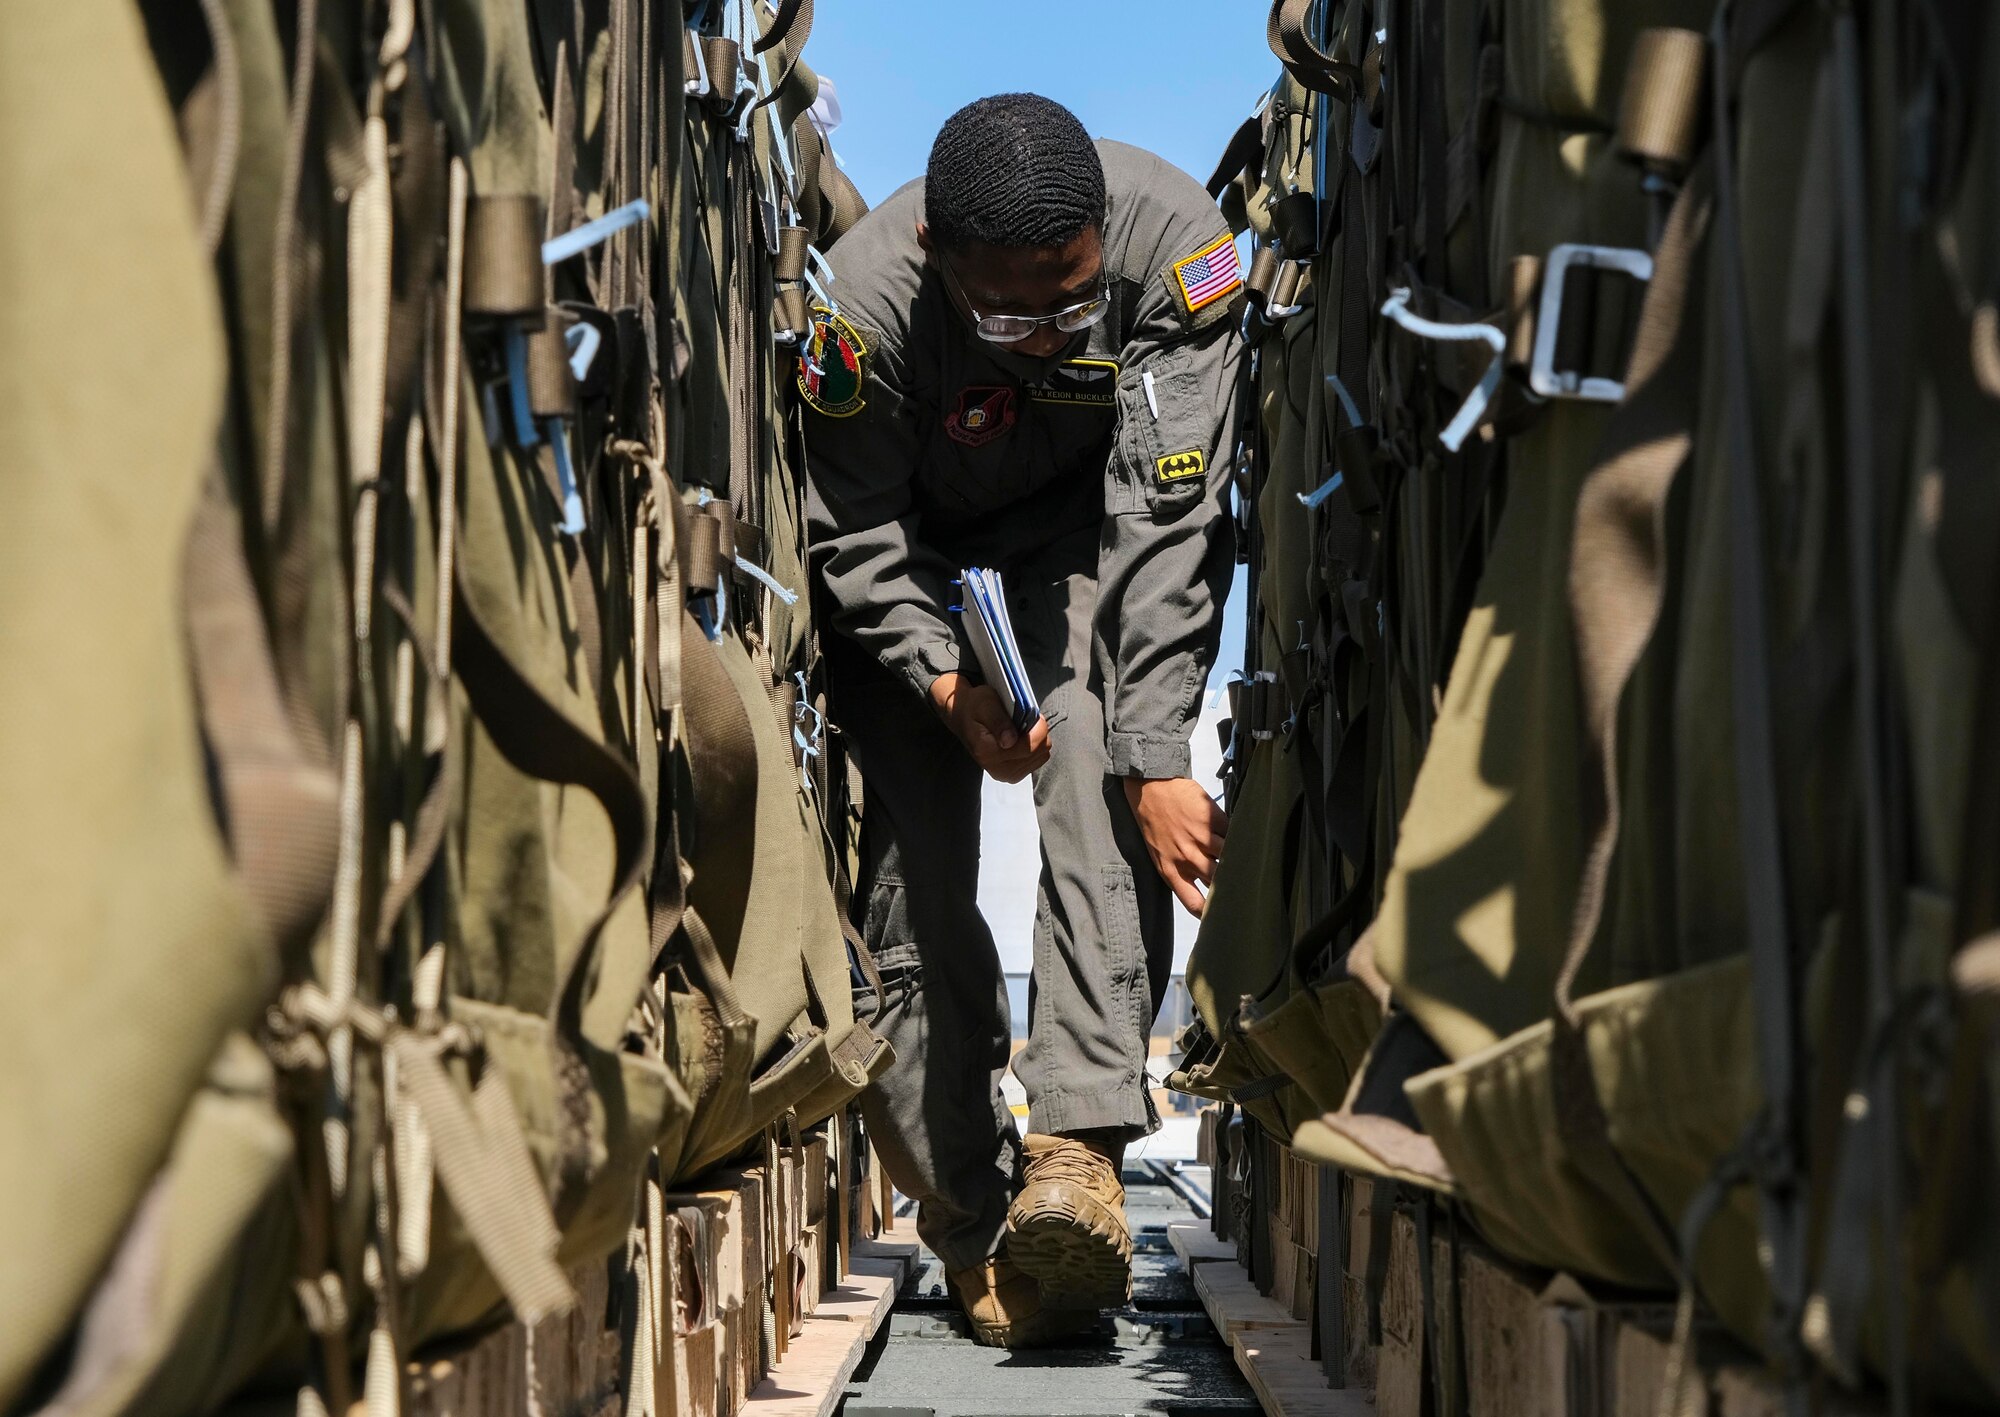 Senior Airman Keion Buckley, 36th Airlift Squadron loadmaster, checks Japan Ground Self-Defense Force container delivery system bundles prior to their upload onto a C-130J Super Hercules for an equipment airdrop as part of exercise Airborne 21 at Yokota Air Base, Japan, March 10, 2021.